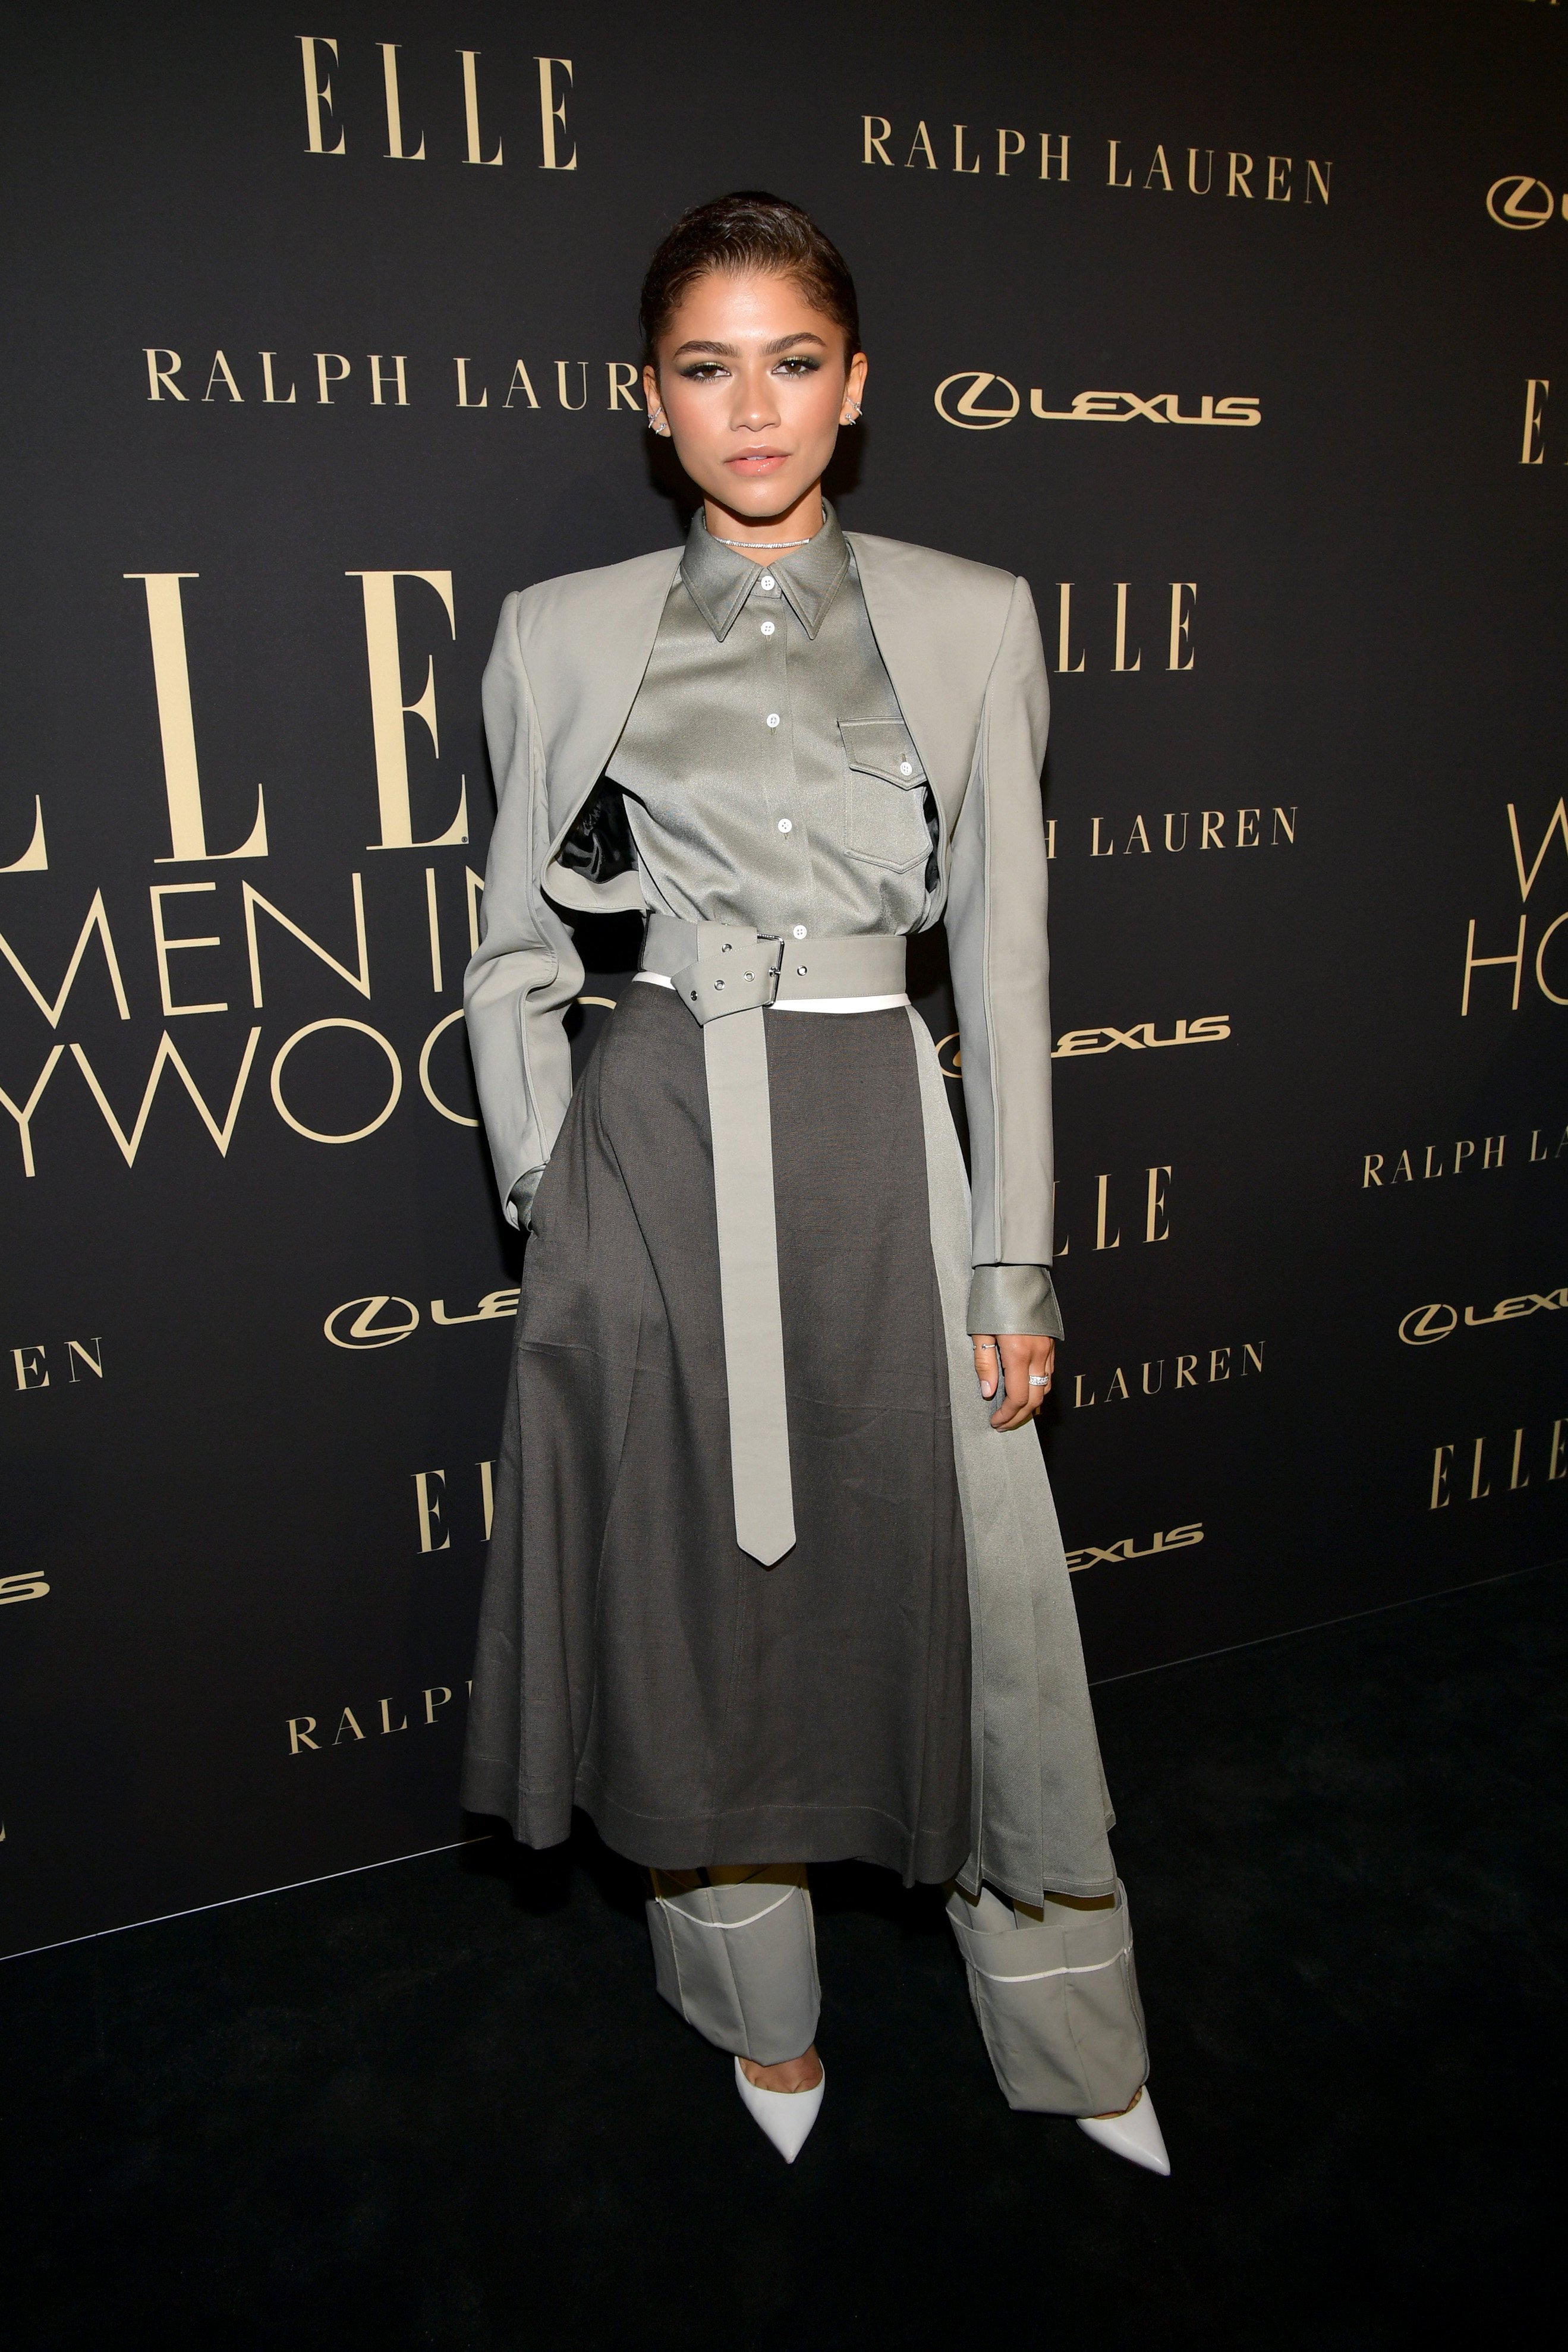 Zendaya attends an Elle event  in California wearing Peter Do in 2019. Photo: Getty Images